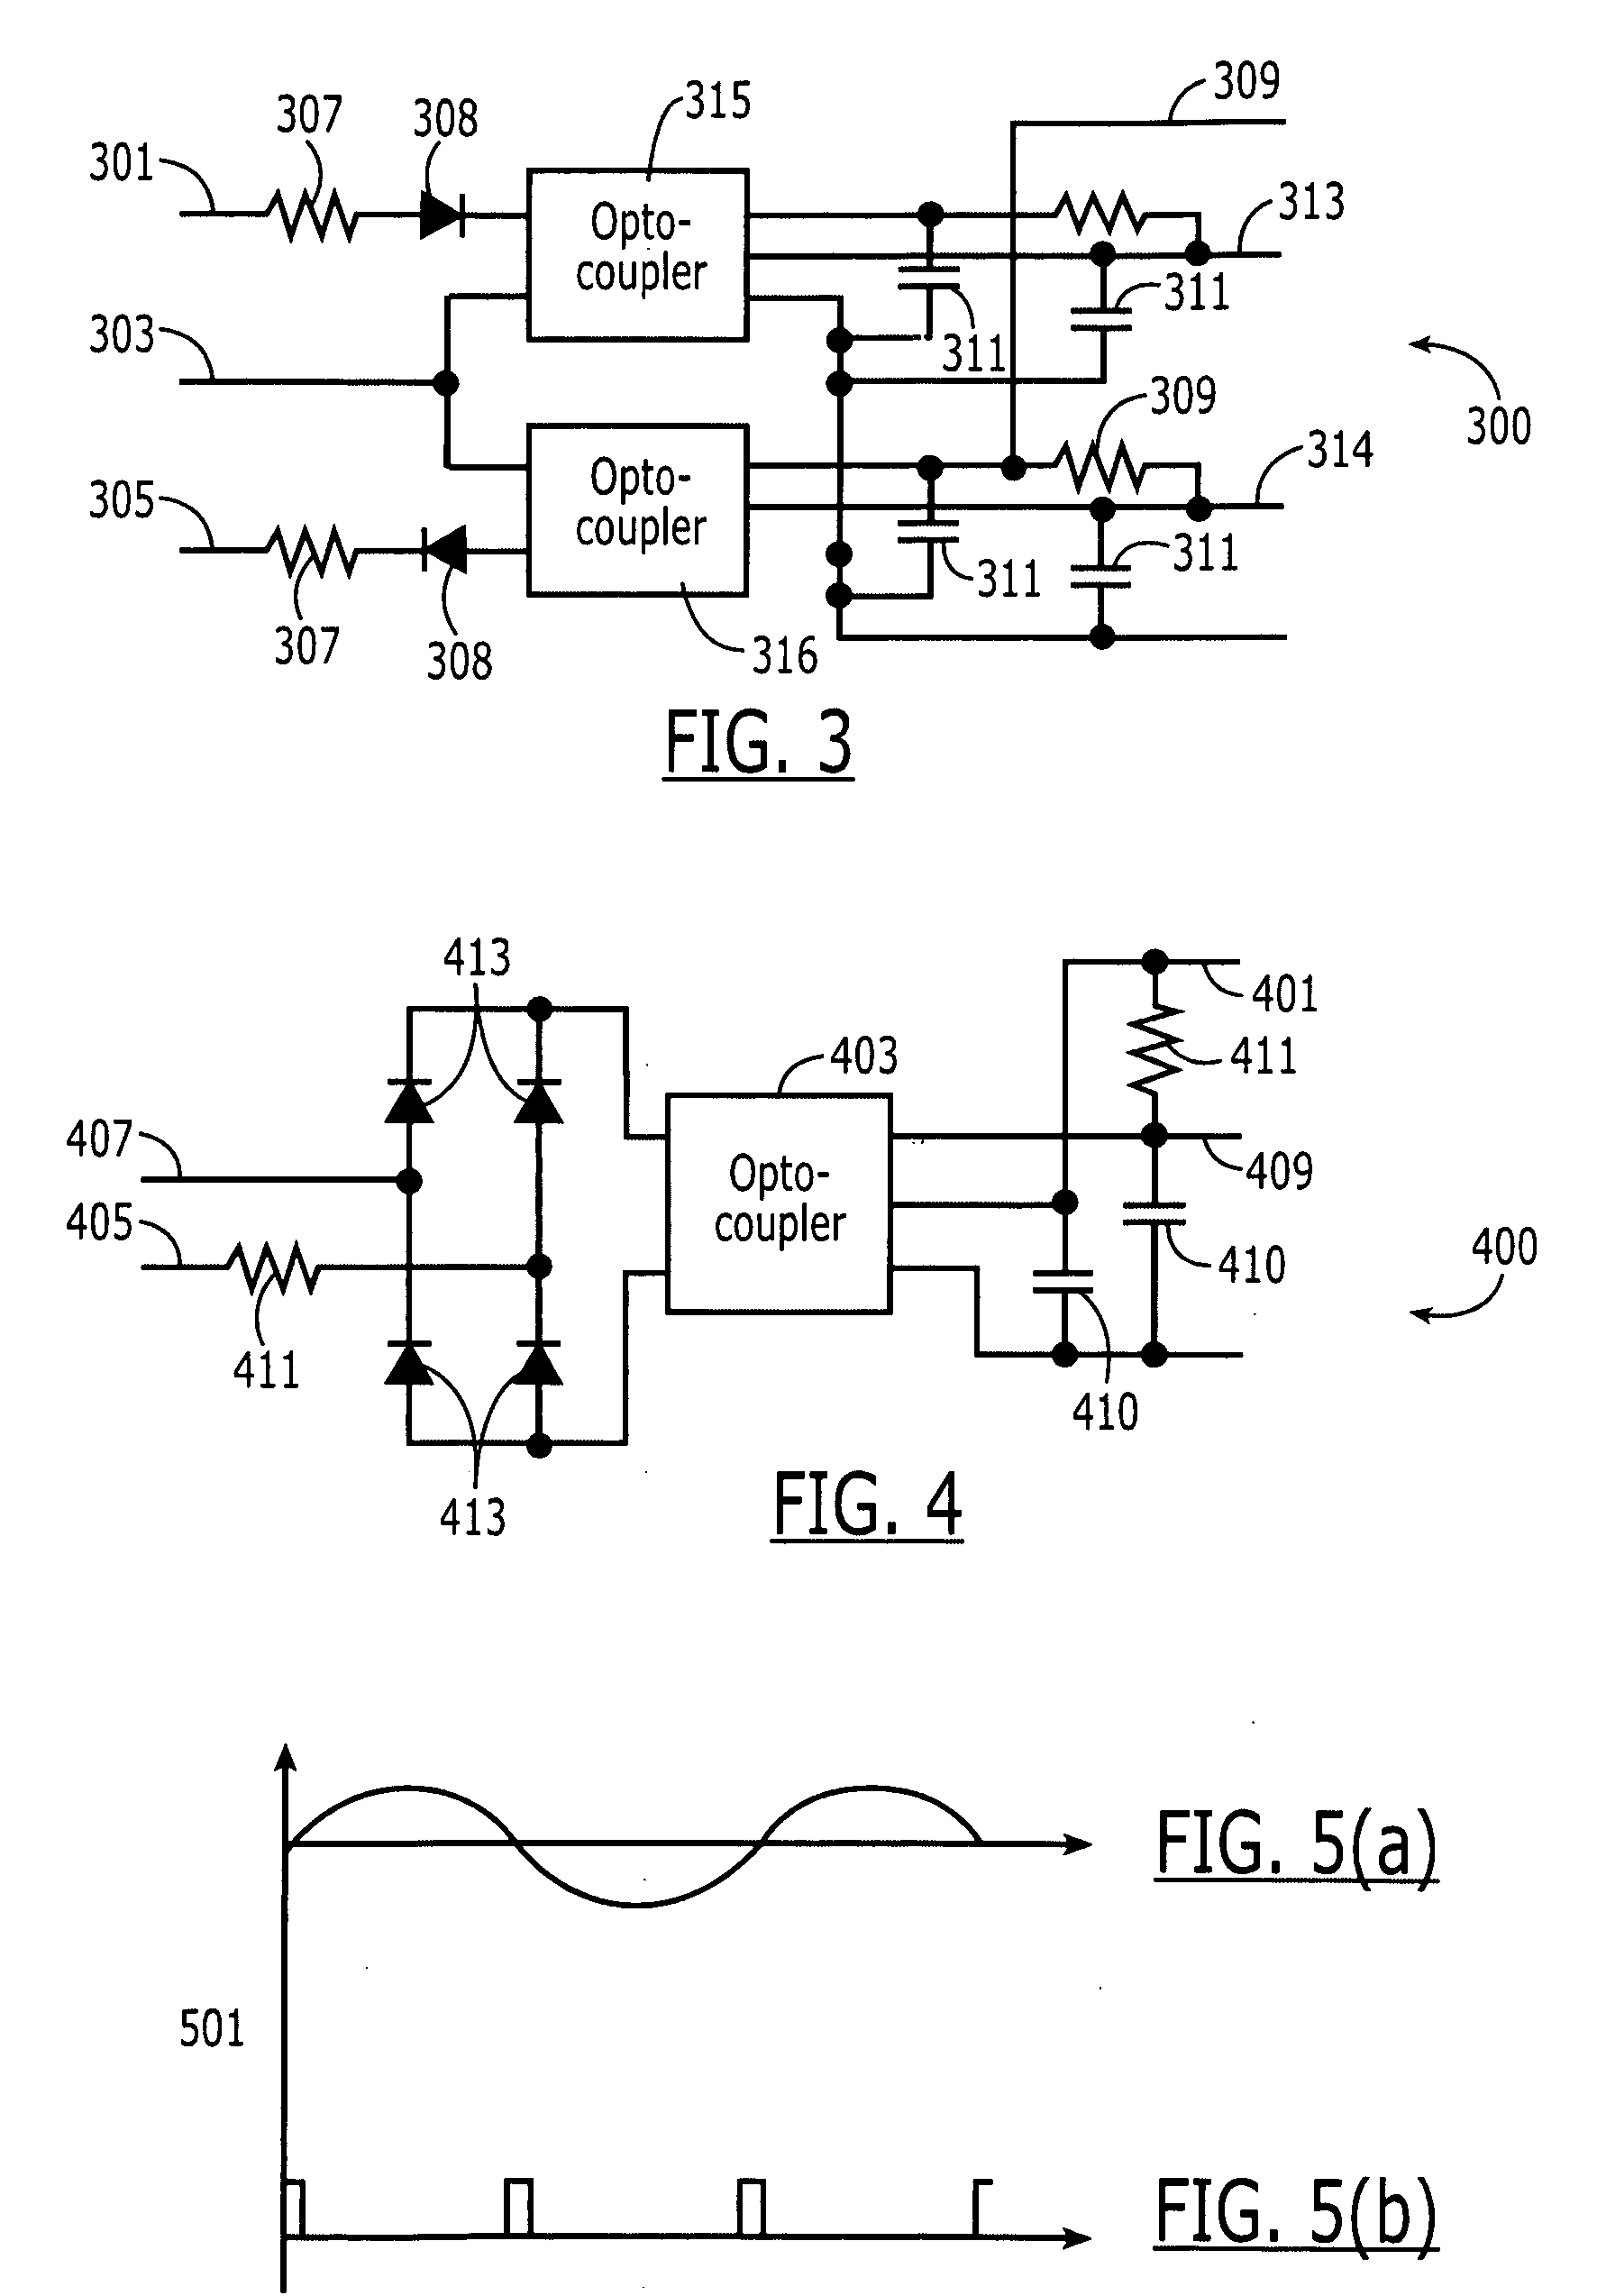 Energy-saving controller for three-phase induction motors